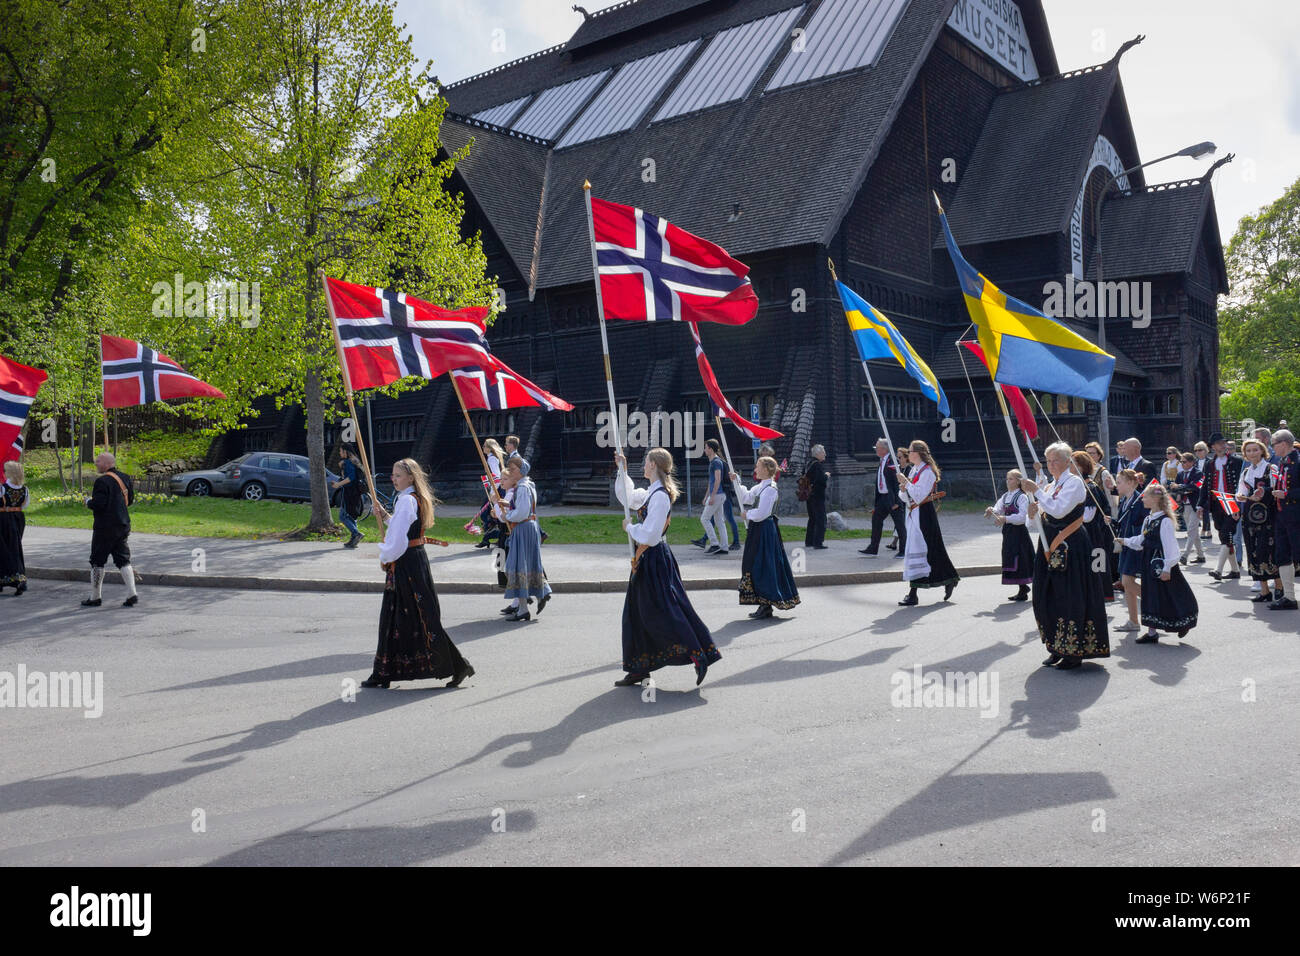 Norwegian patriots holding national flags during the yearly Norways' independence day events near Skansen park's entrance. Scandinavia, Sweden Stock Photo